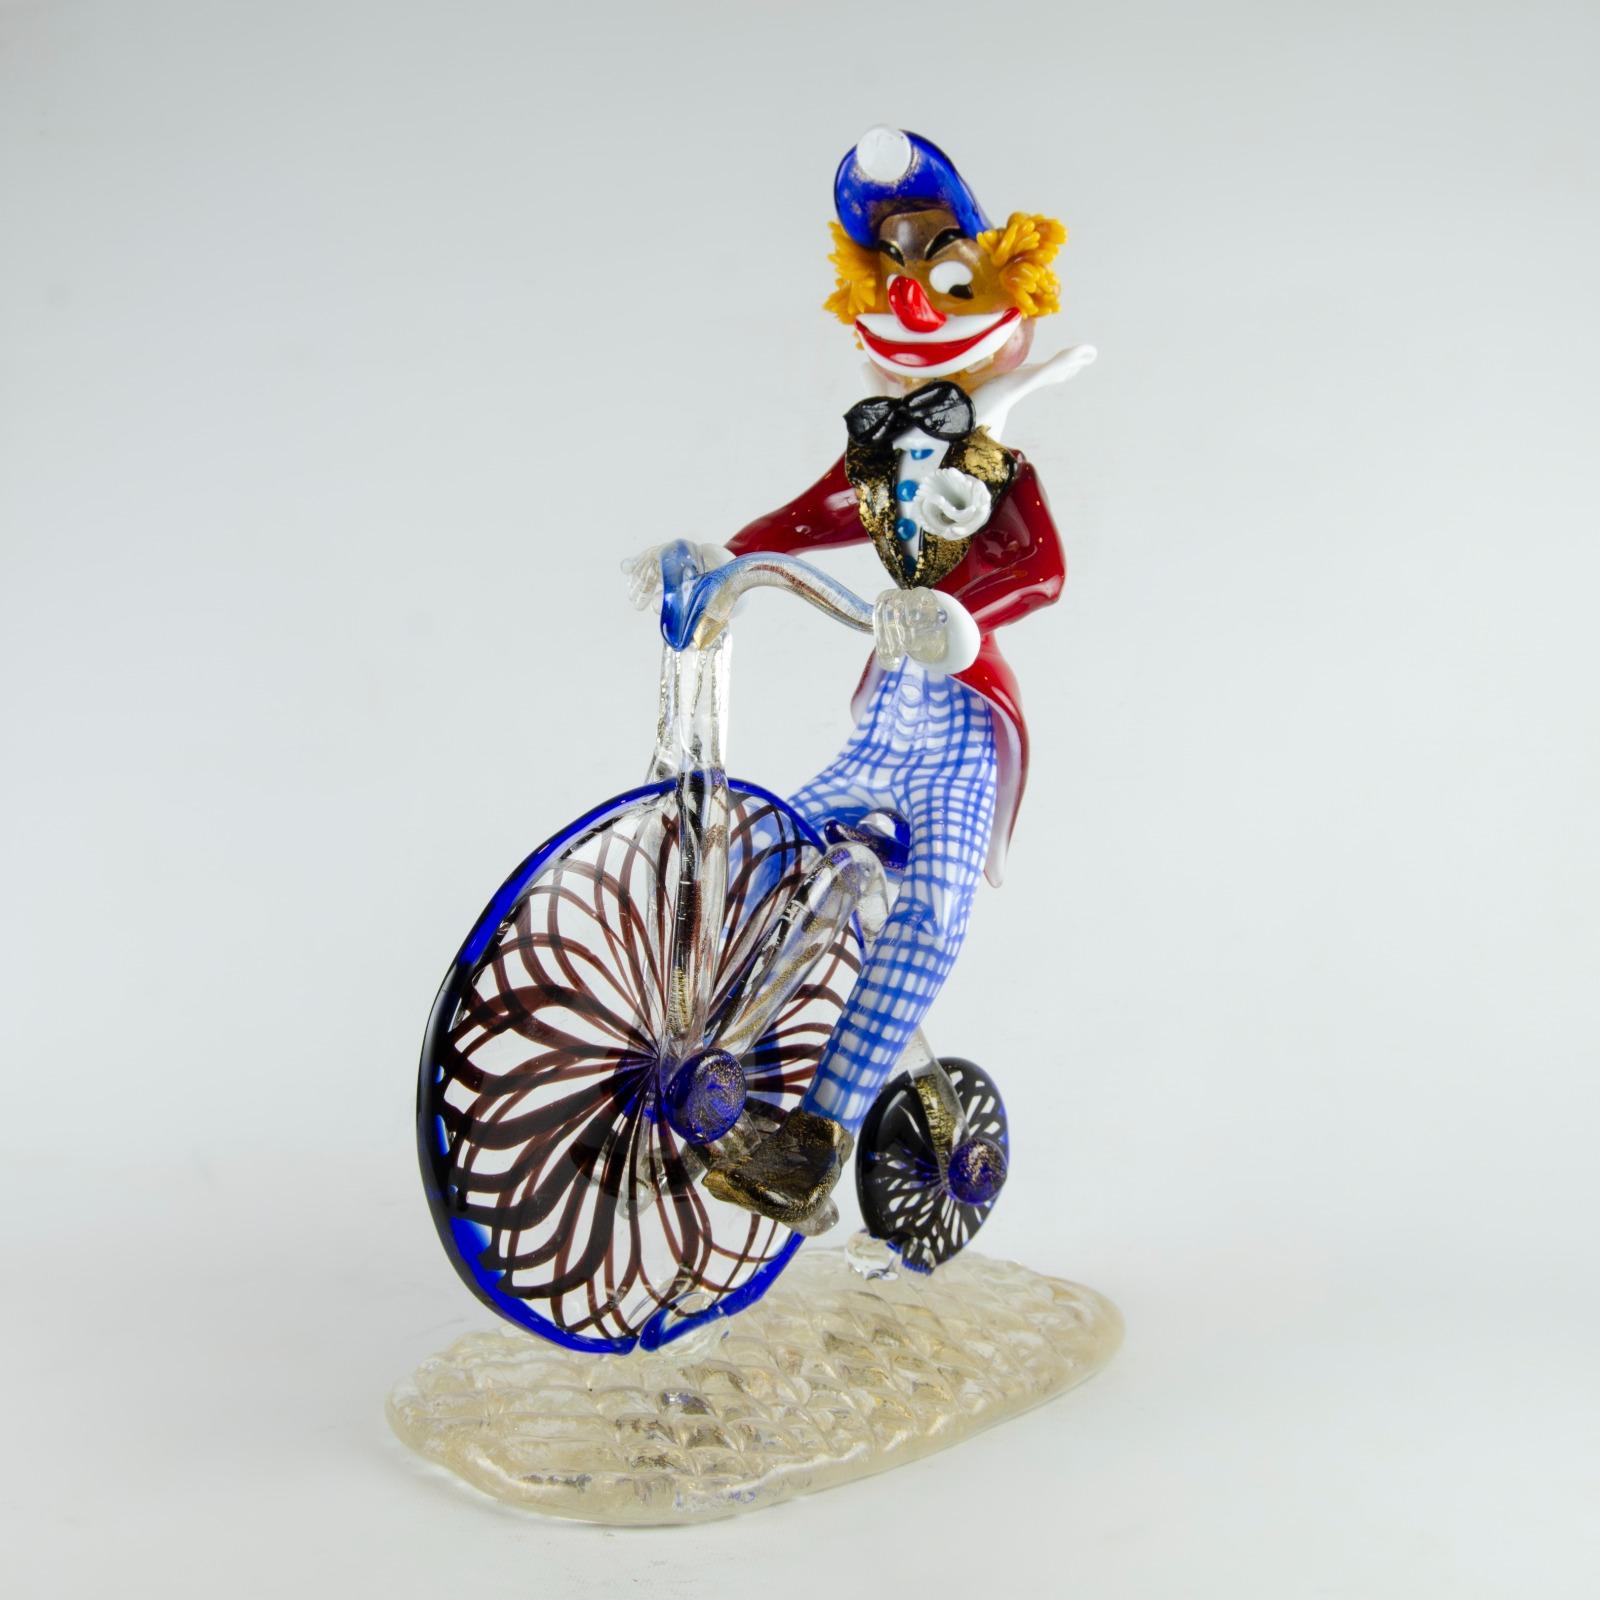 Beautiful murano glass figurine of a clown riding a bicycle, perfect for those collectors who have a special love for them.

high: 40 centimeters
width: 24 centimeters 
Depth: 15 centimeters